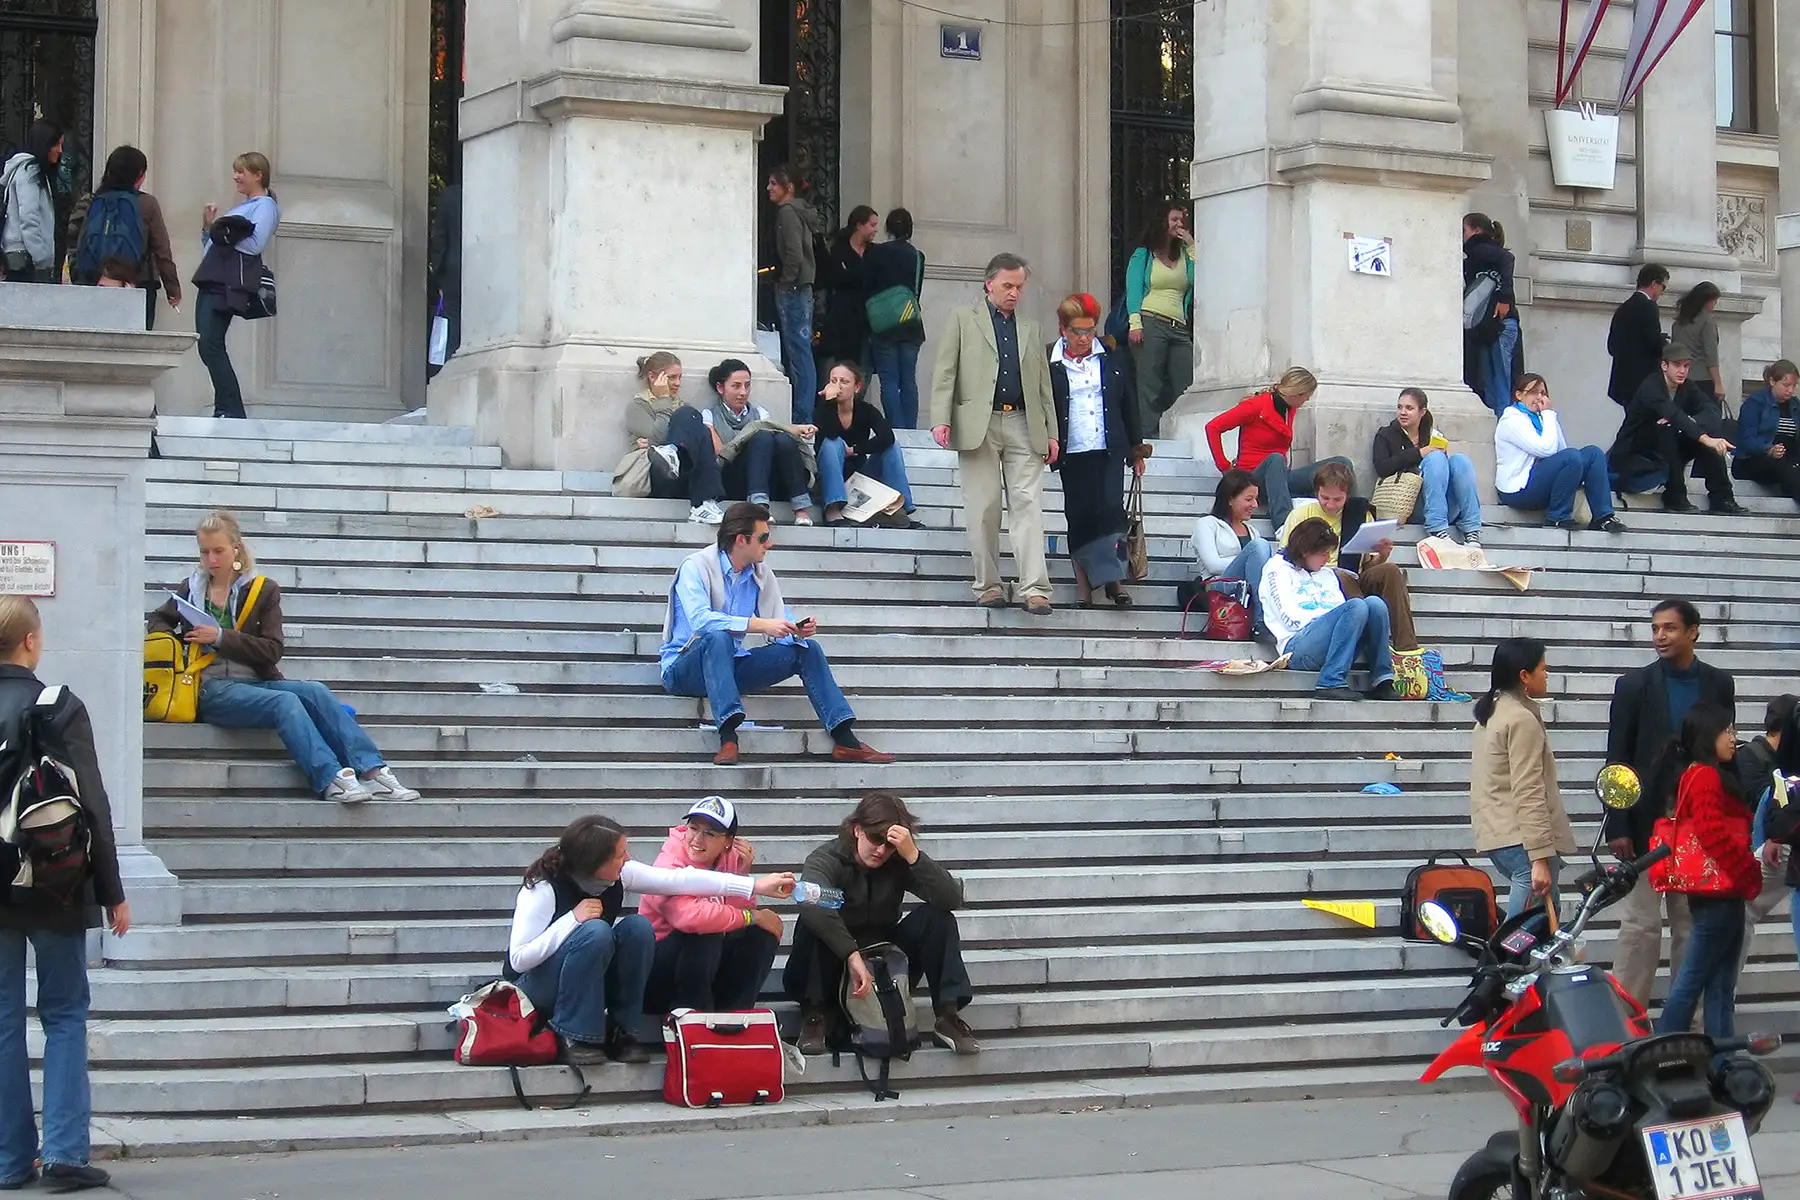 Students at the University of Vienna